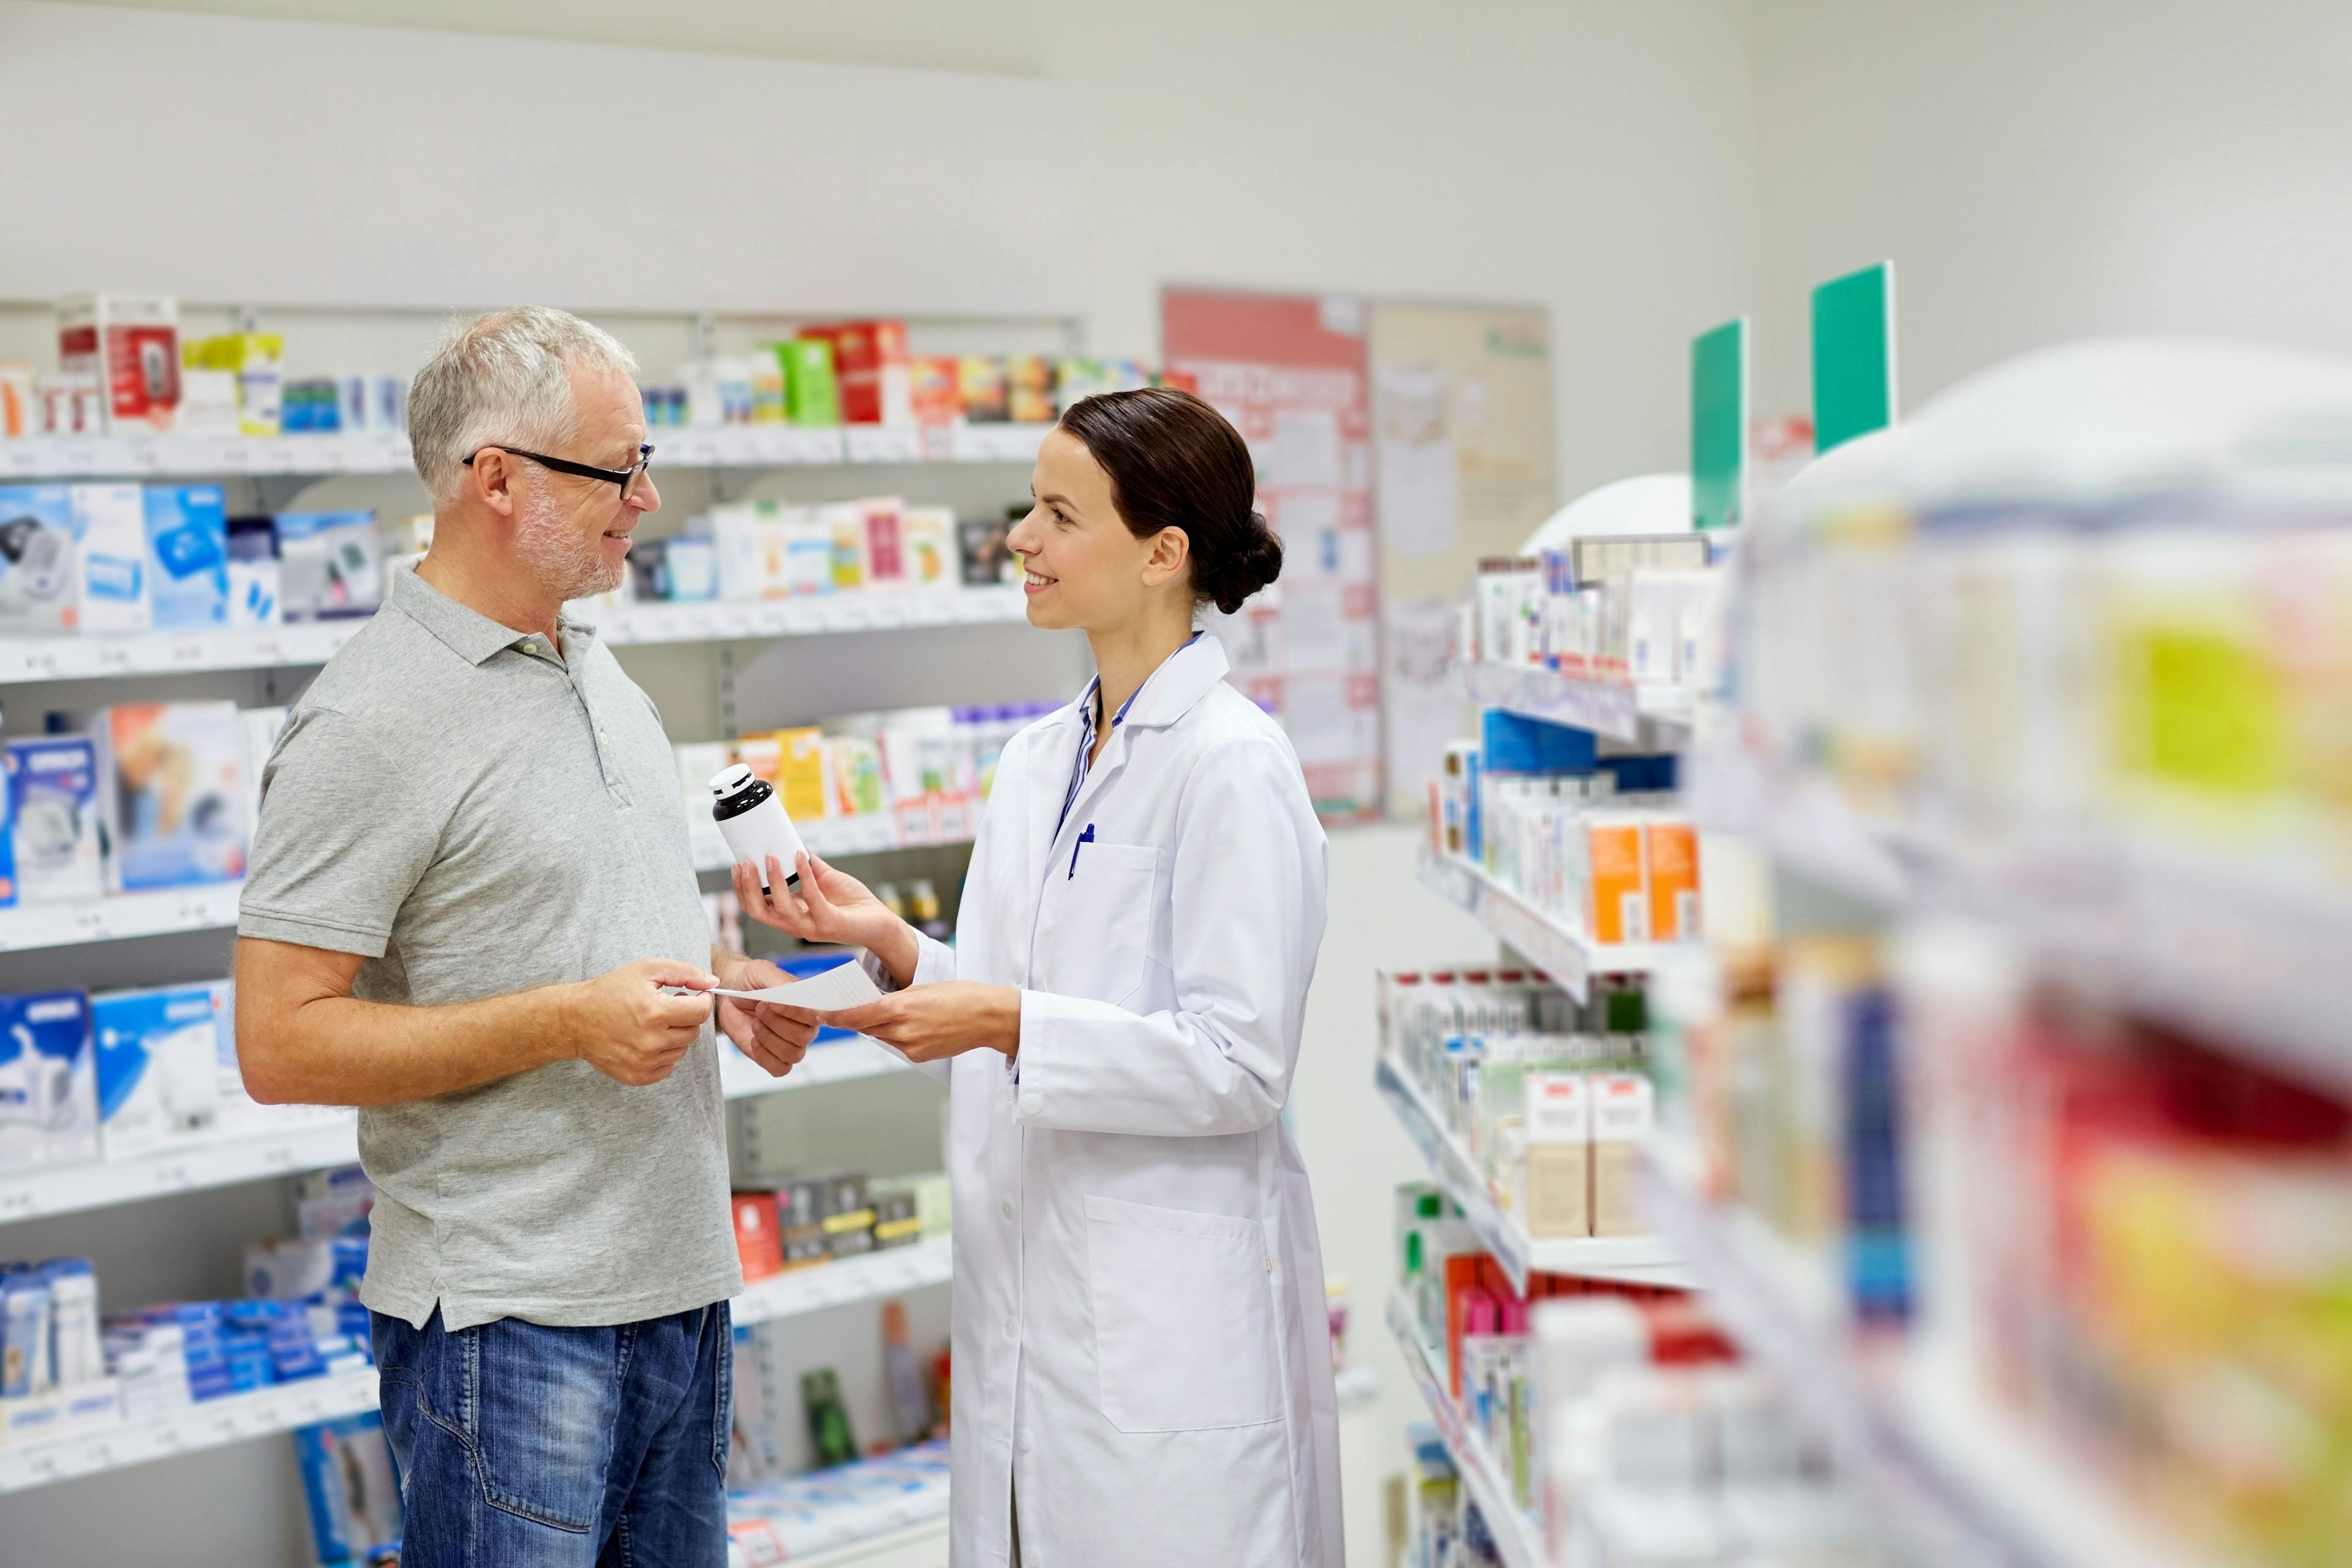 Expert: Pharmacists are Advocates for Patients, Simplifying the Health Care System